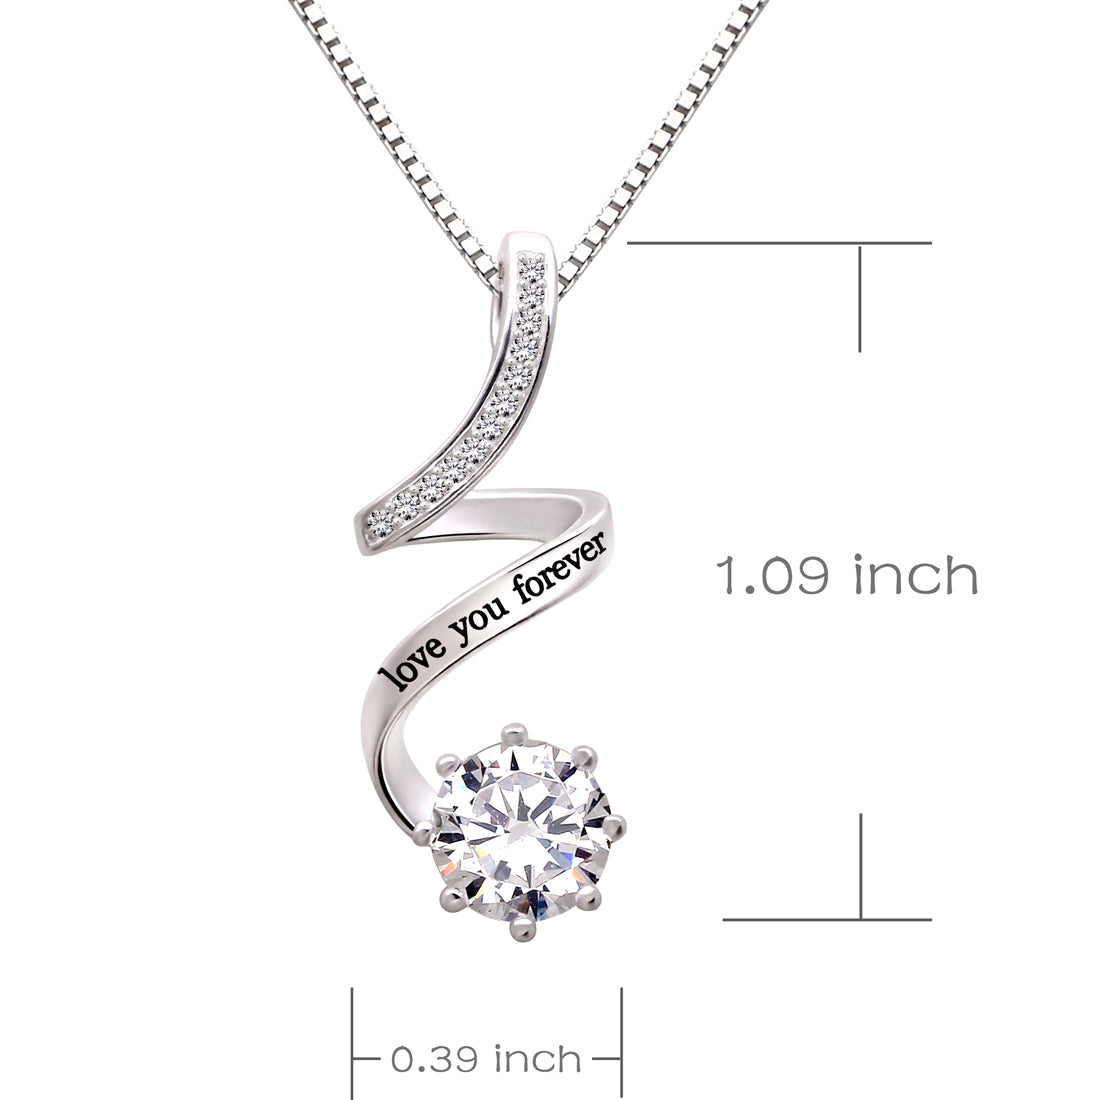 ALOV Jewelry Sterling Silver "love you forever" Cubic Zirconia Pendant Necklace